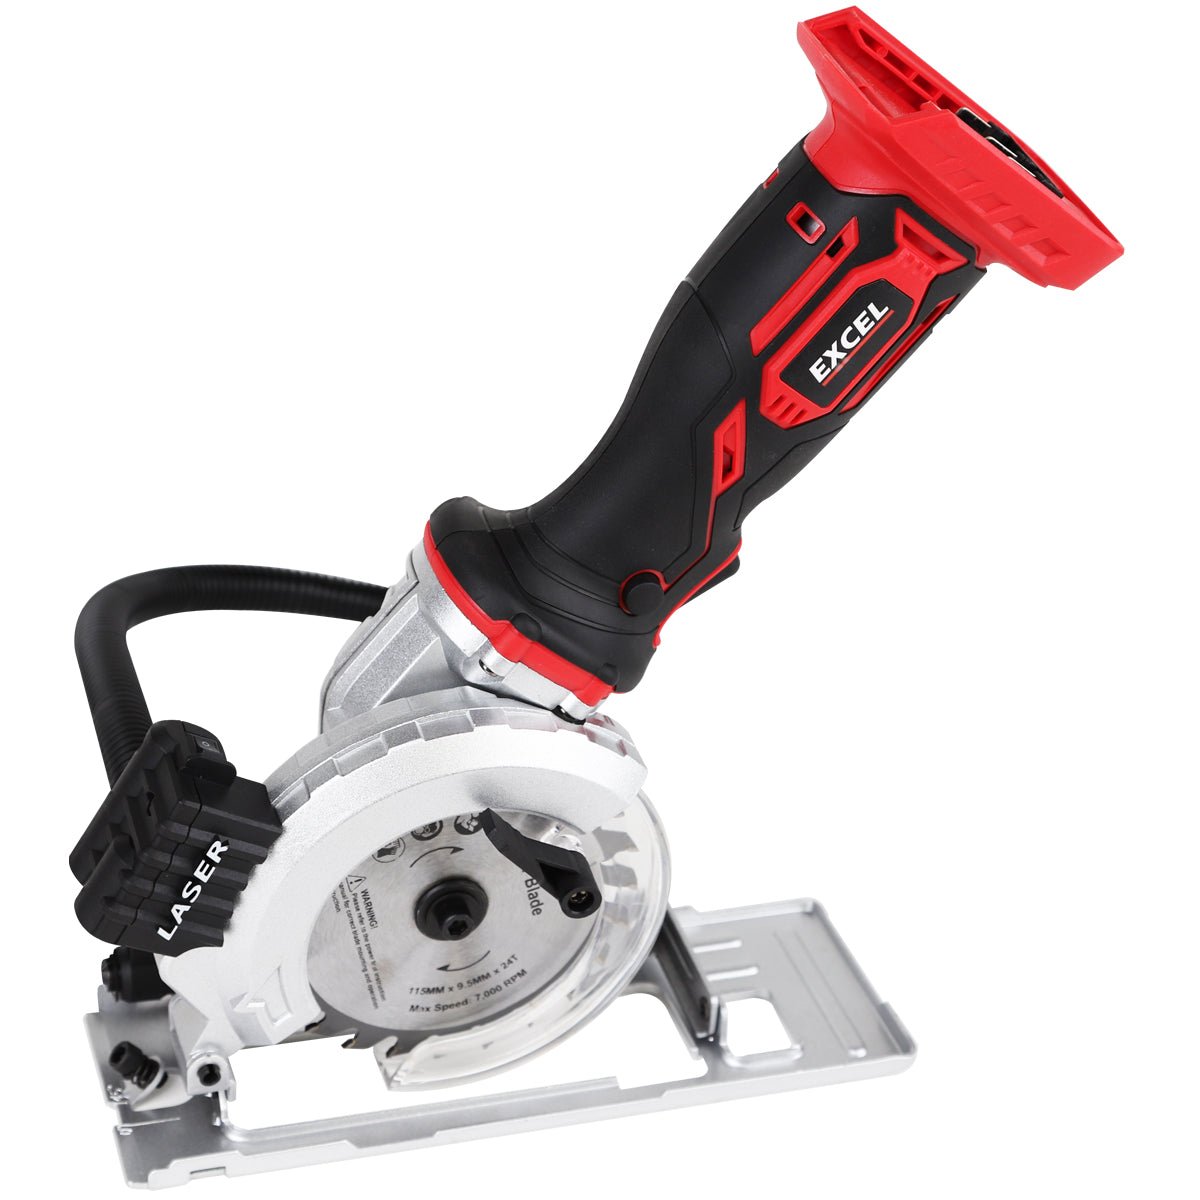 Excel 18V 115mm Mini Circular Saw with 2 x 5.0Ah Battery & Charger